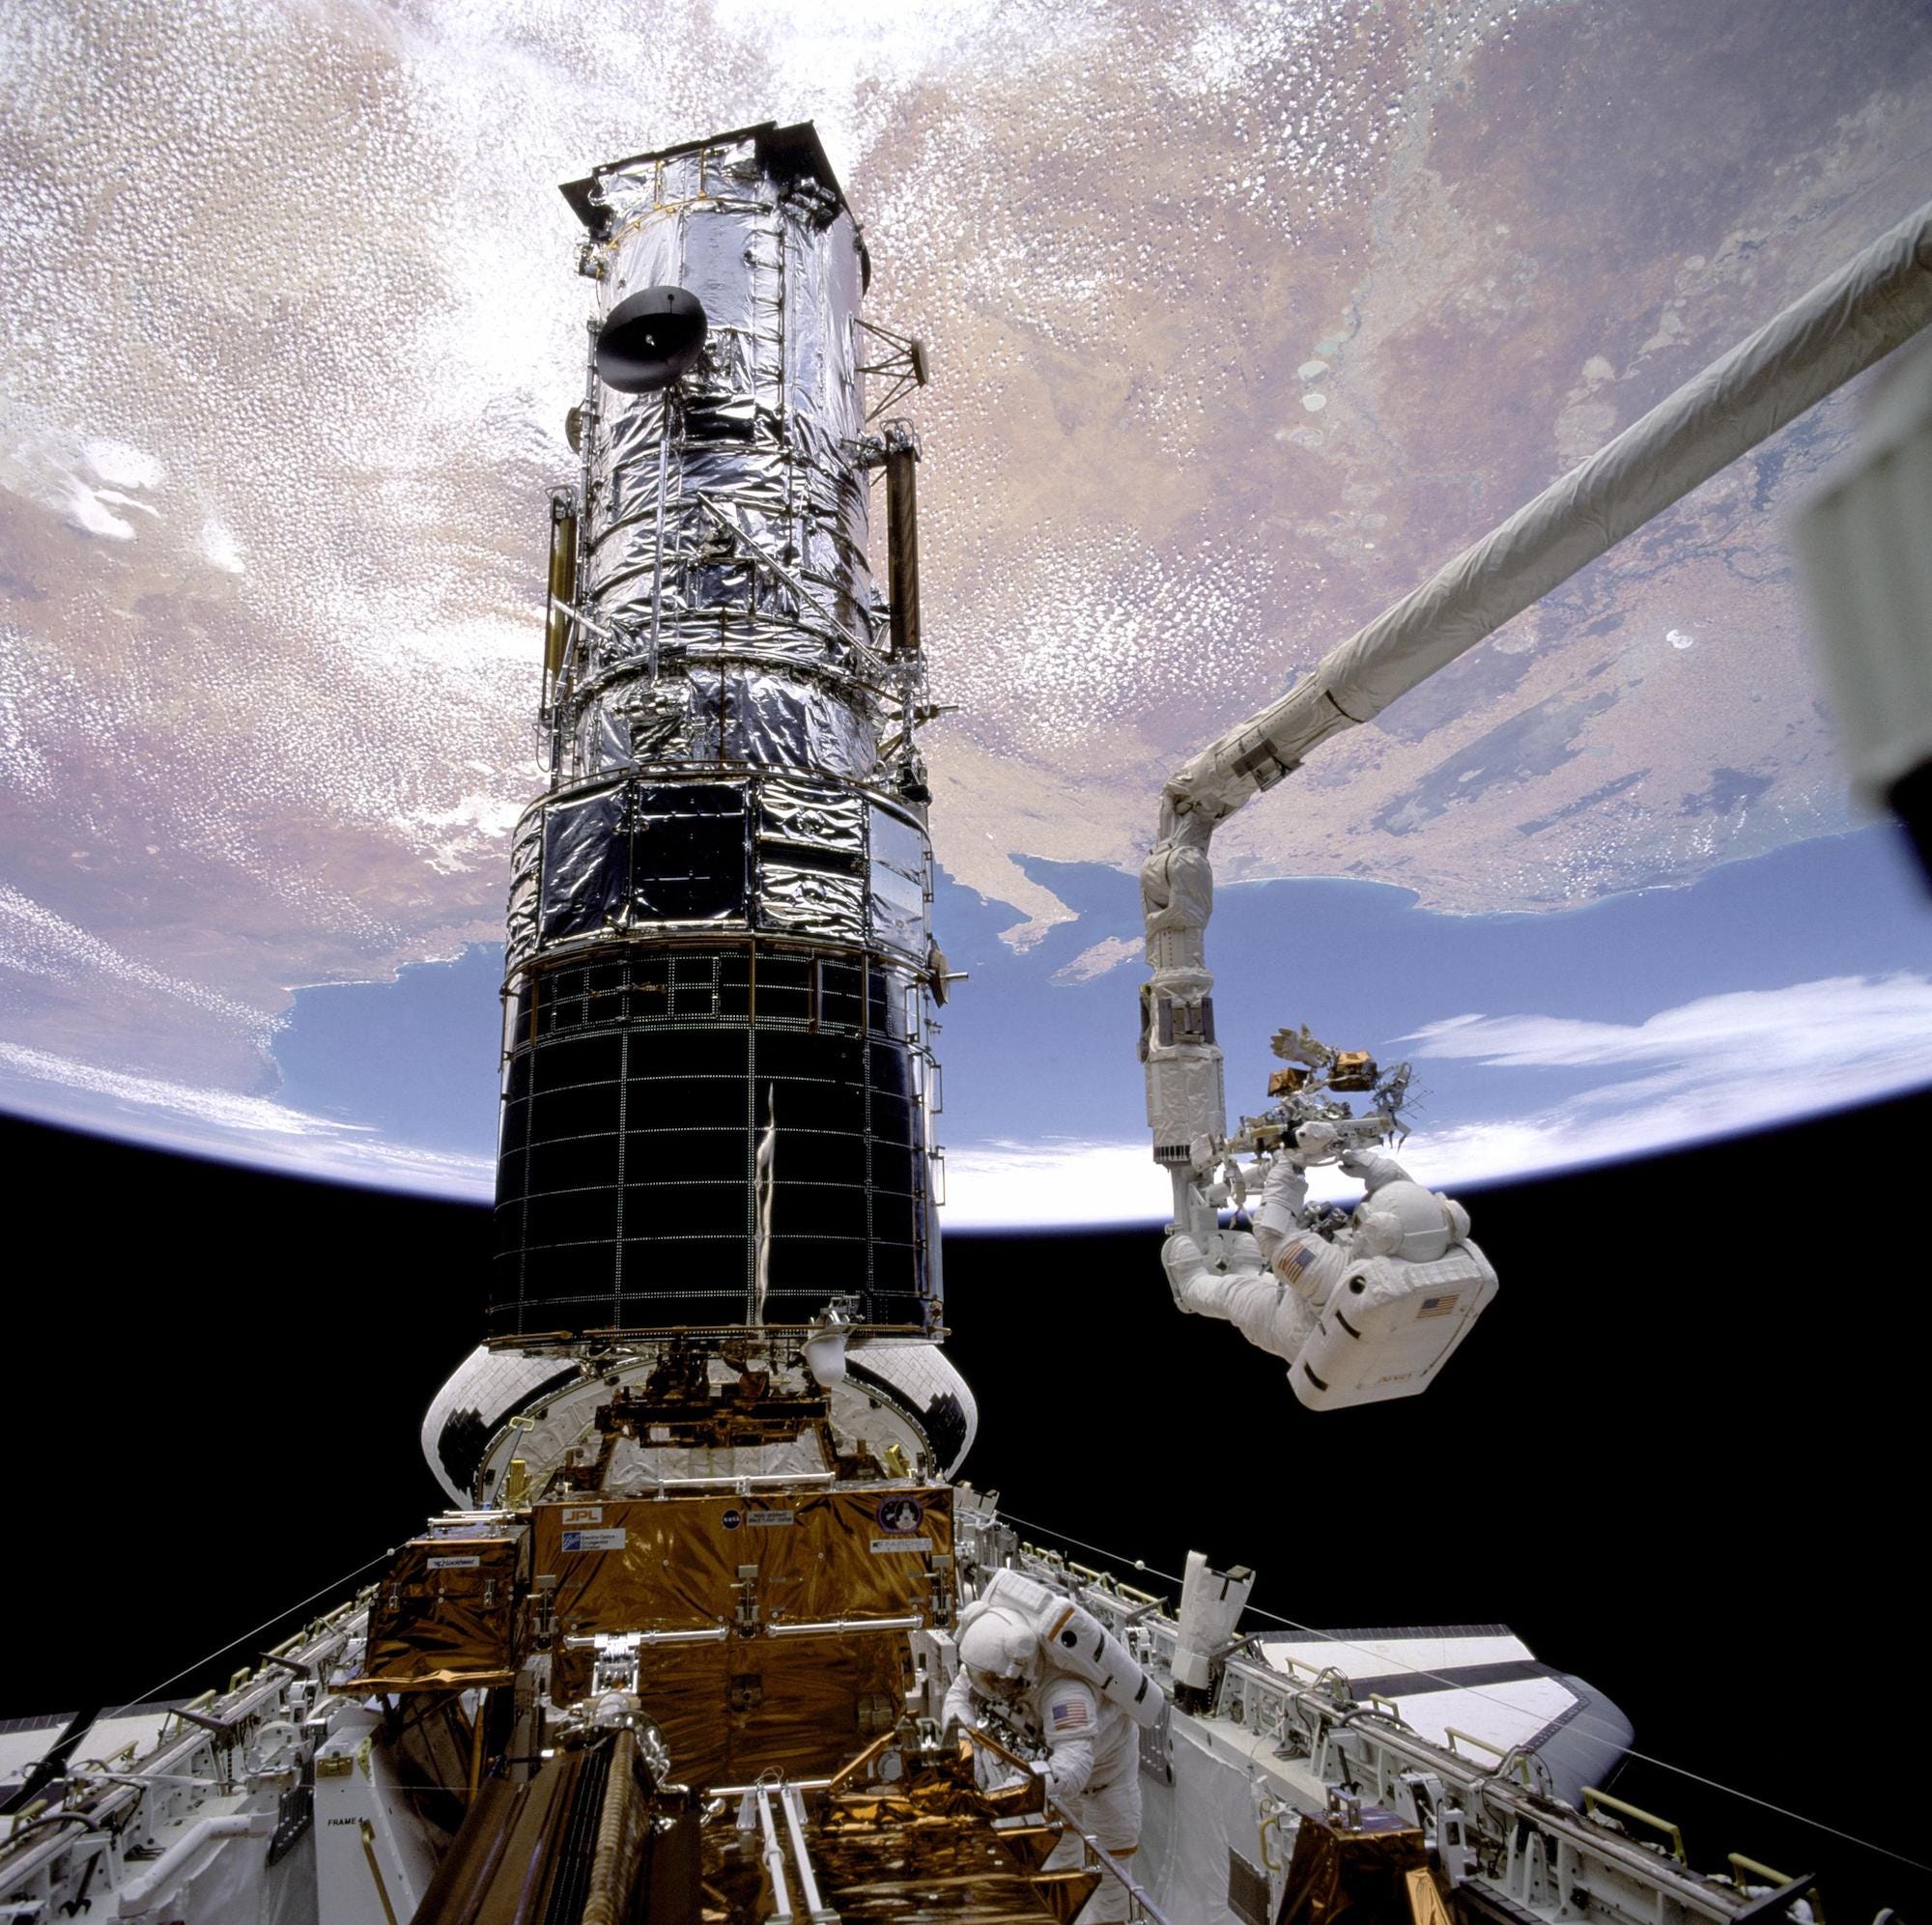 two astronauts in spacesuits work on the hubble space telescope in space above earth